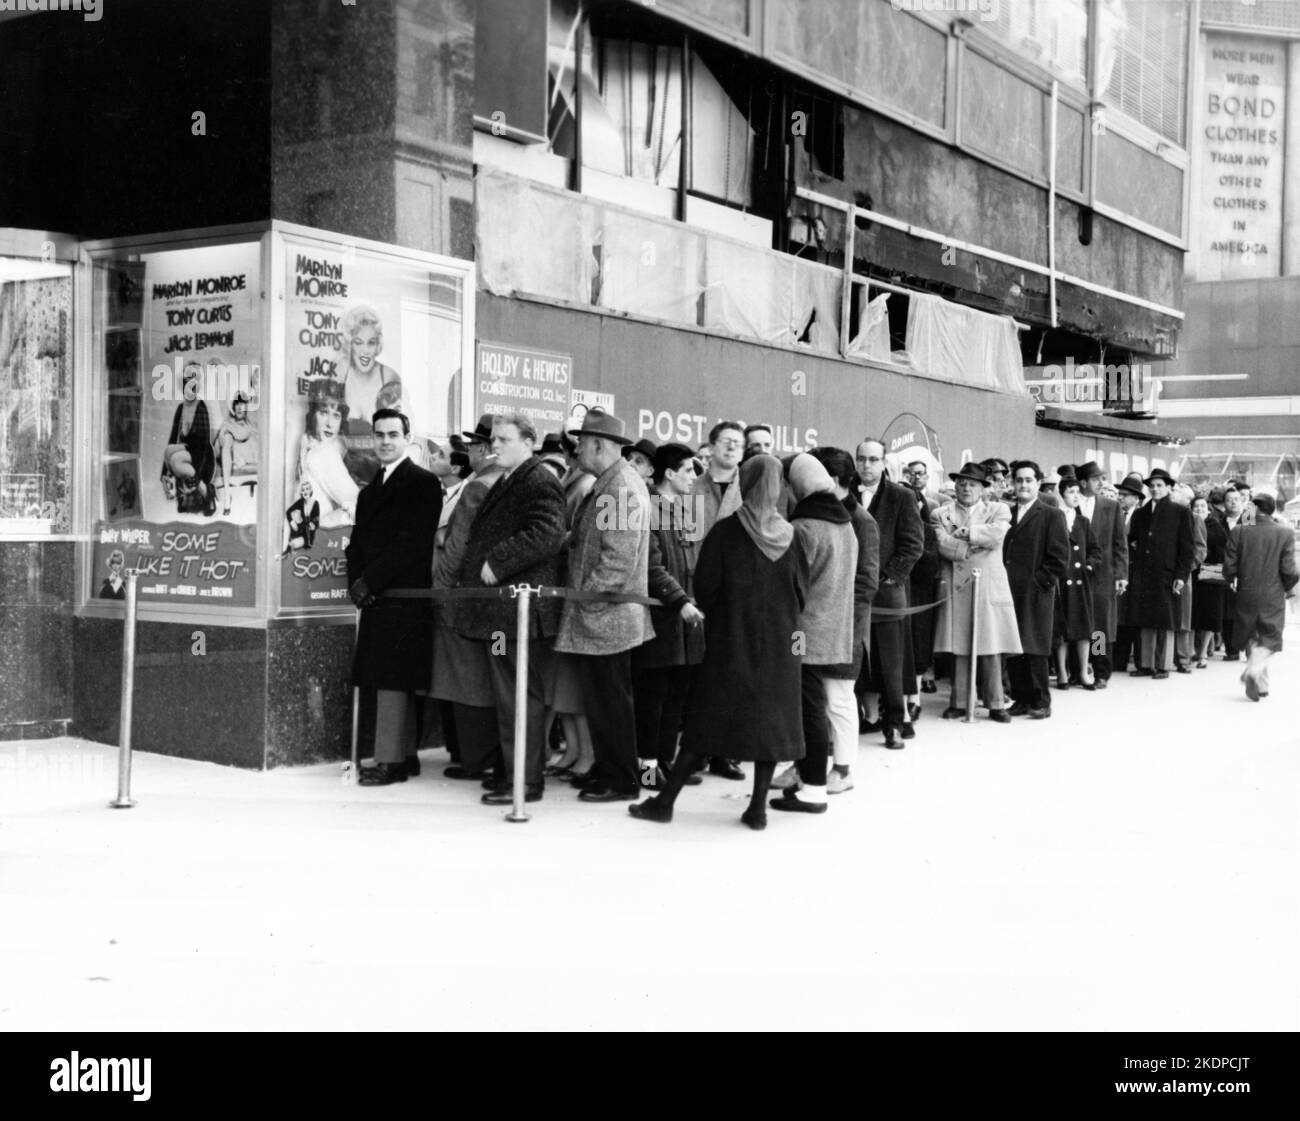 Loew's State Movie Theatre in New York City in March 1959 with queue to see MARILYN MONROE TONY CURTIS and JACK LEMMON in SOME LIKE IT HOT 1959 director BILLY WILDER screenplay Billy Wilder and I.A.L. Diamond Ashton Productions / The Mirisch Corporation / United Artists Stock Photo